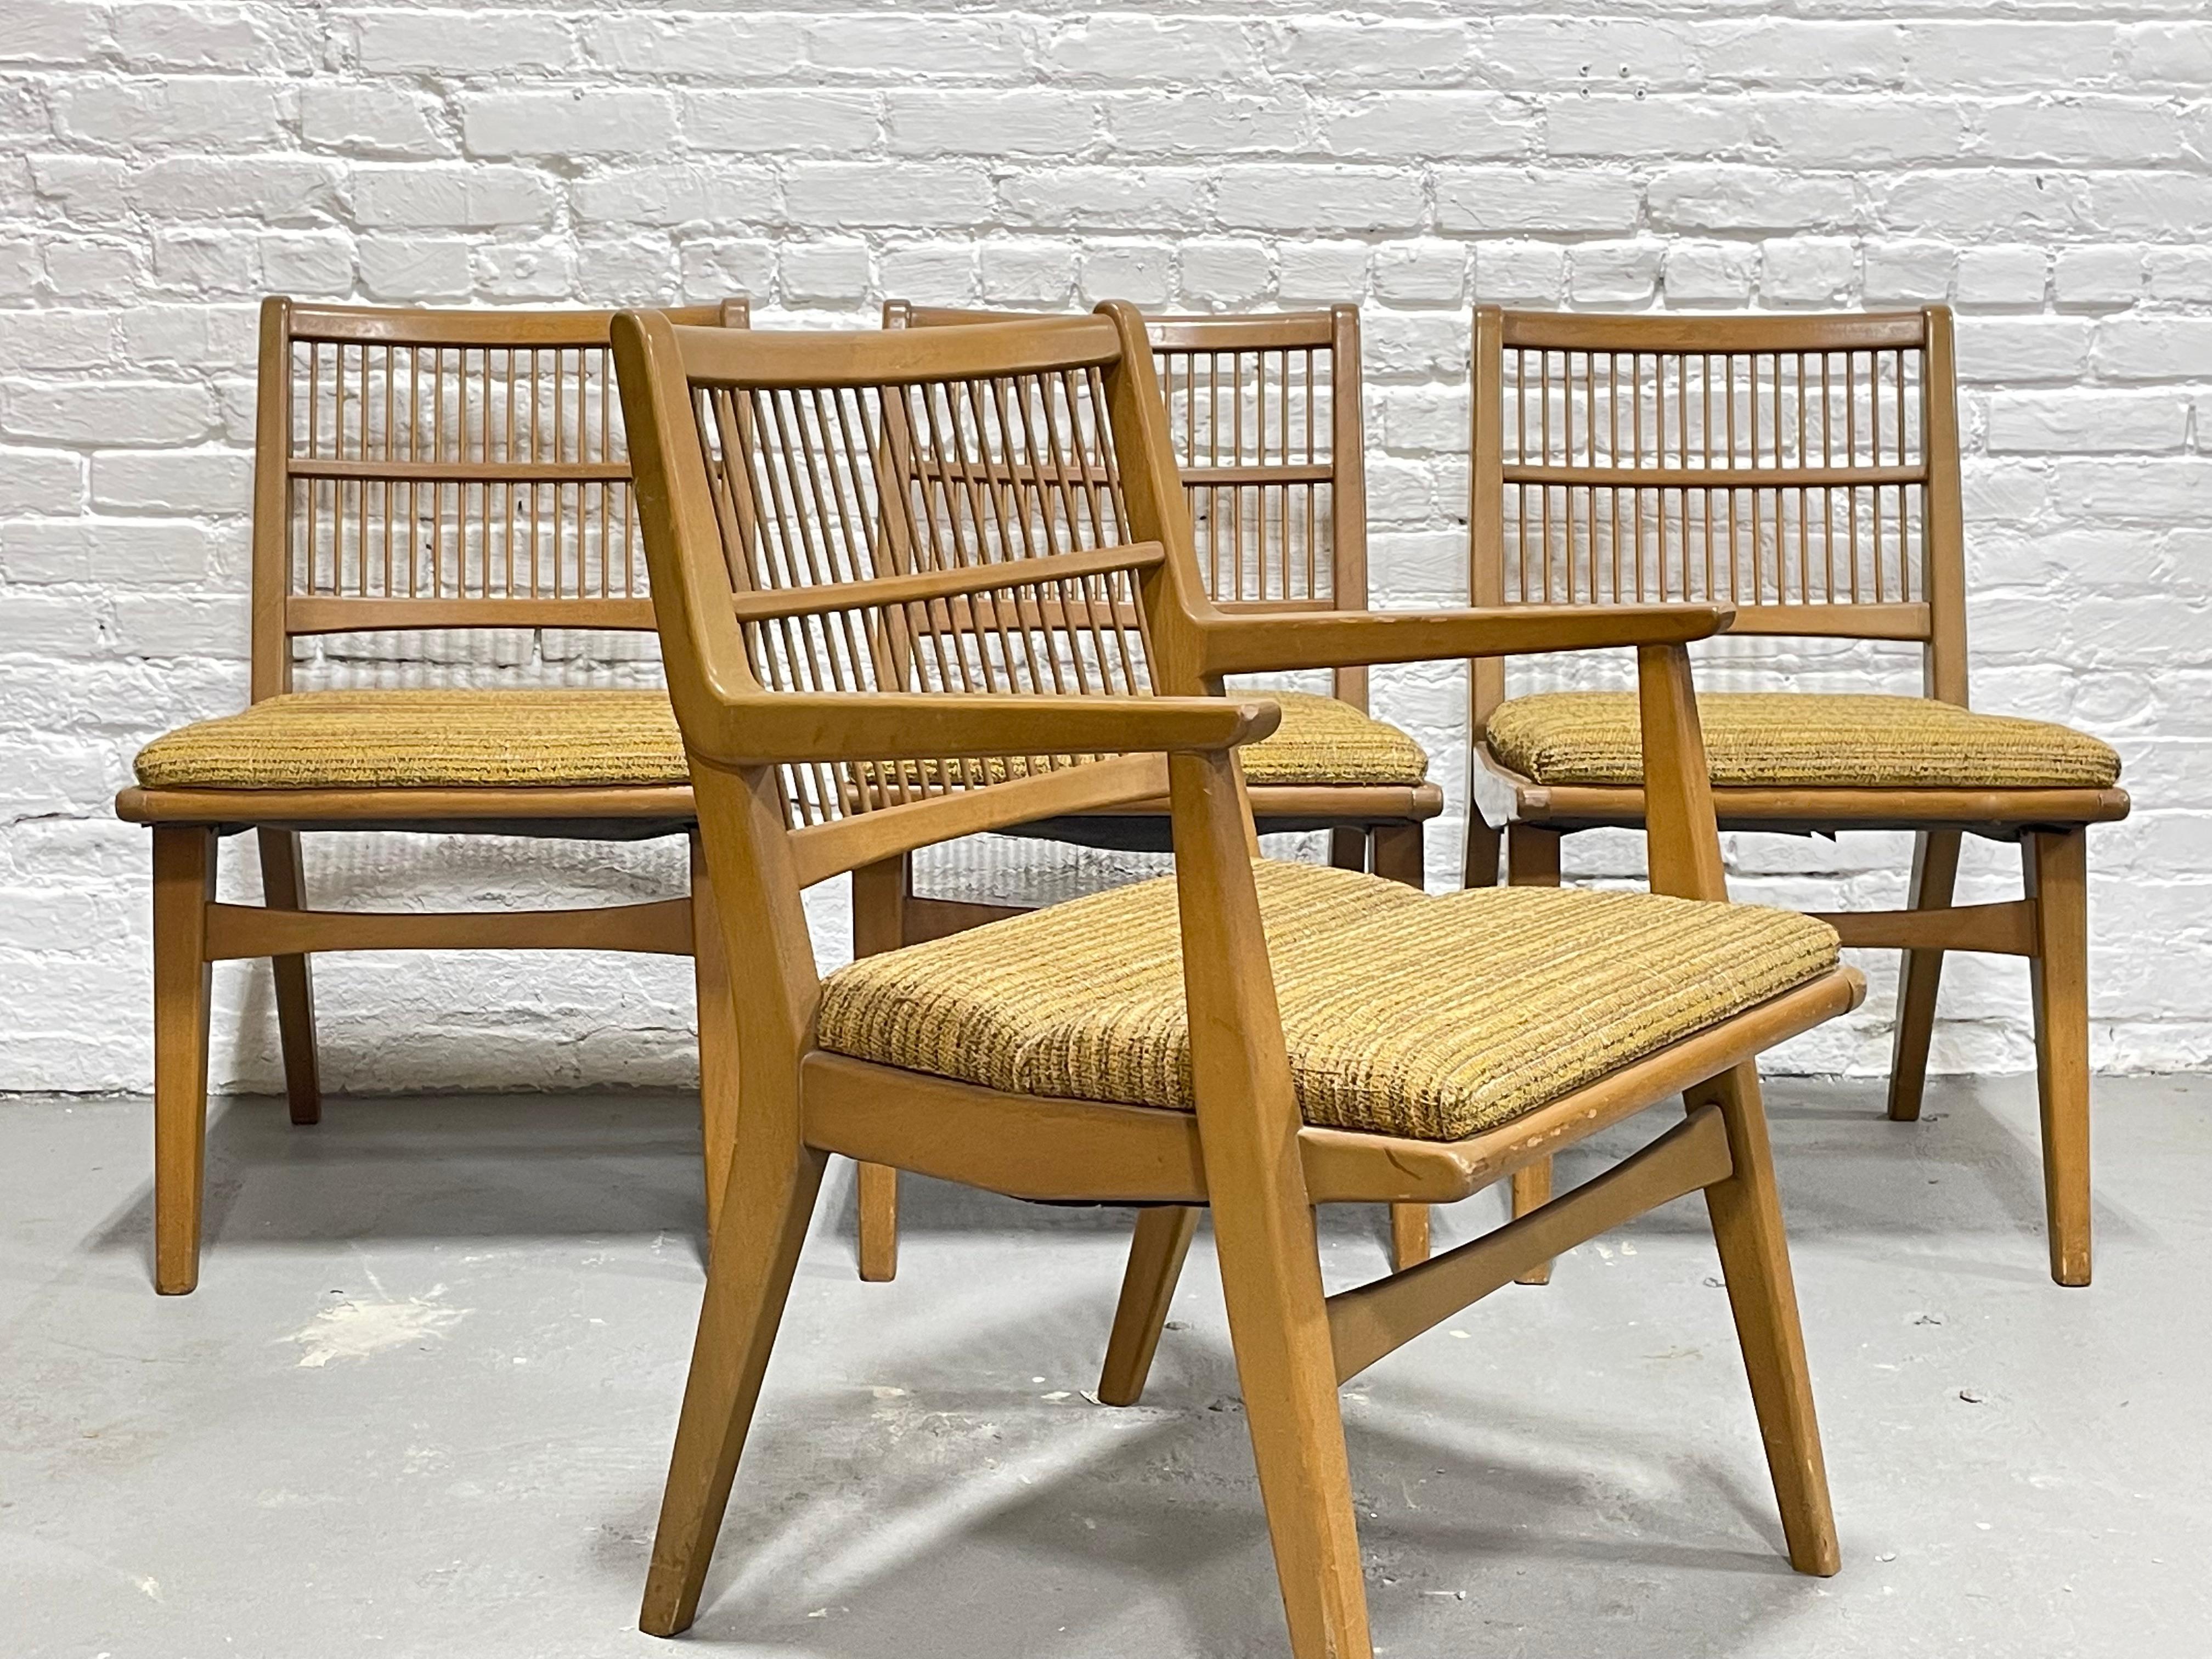 Mid-Century Modern Spindle Back Dining Chairs by Red Lion Furniture Company. This incredible set includes four spindle back dining chairs with original upholstery in a lovely retro mustard and brown soft nubby fabric. The chairs have a unique “bend”